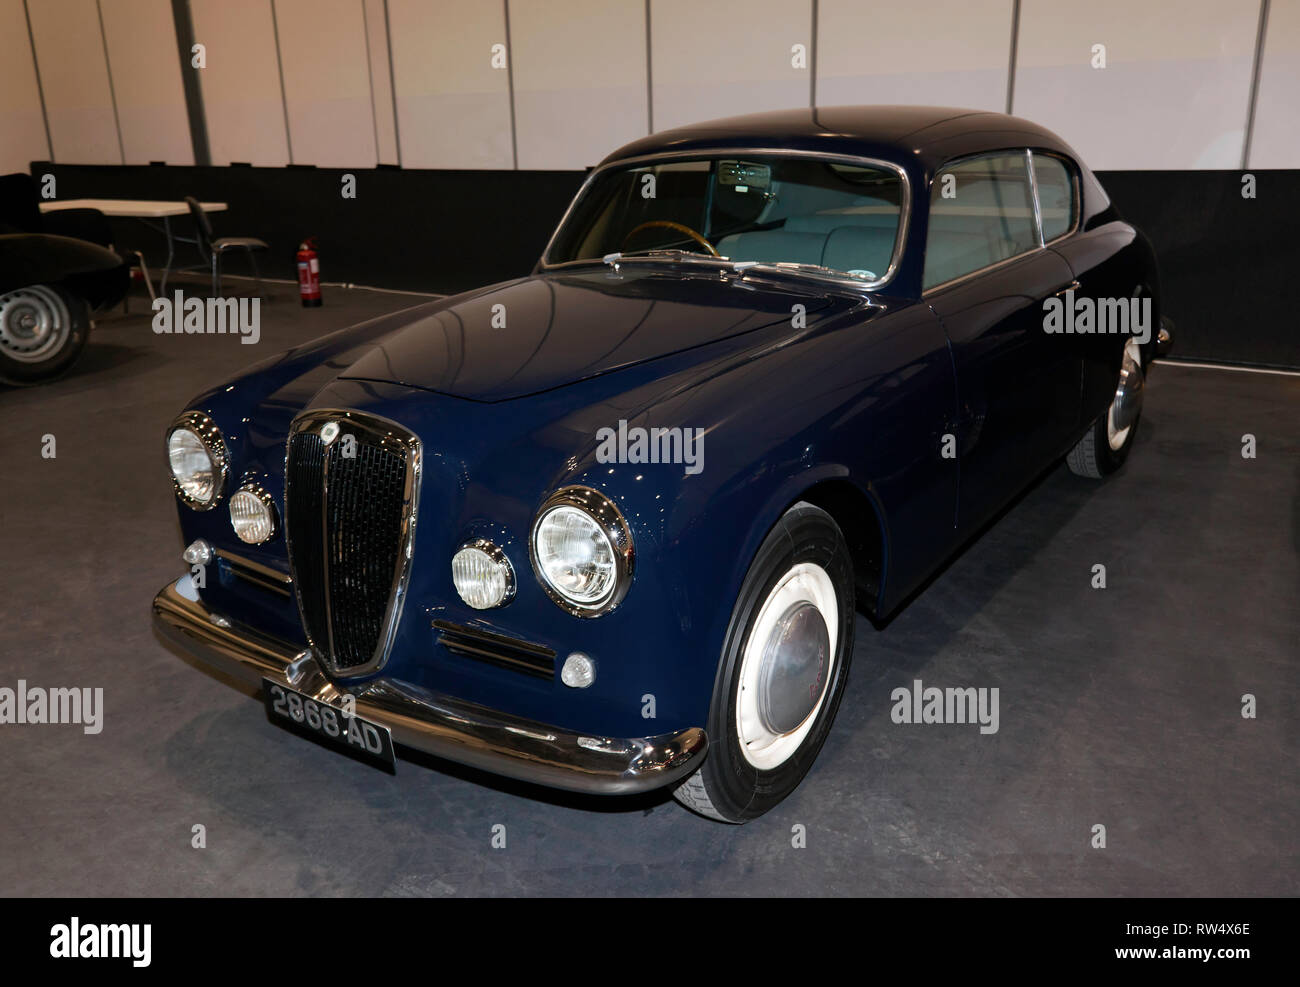 Three-quarter Front-View of a 1955 Lancia Aurelia B20 Coupe 2.5,on display in the Paddock Area of the 2019 London Classic Car Show Stock Photo